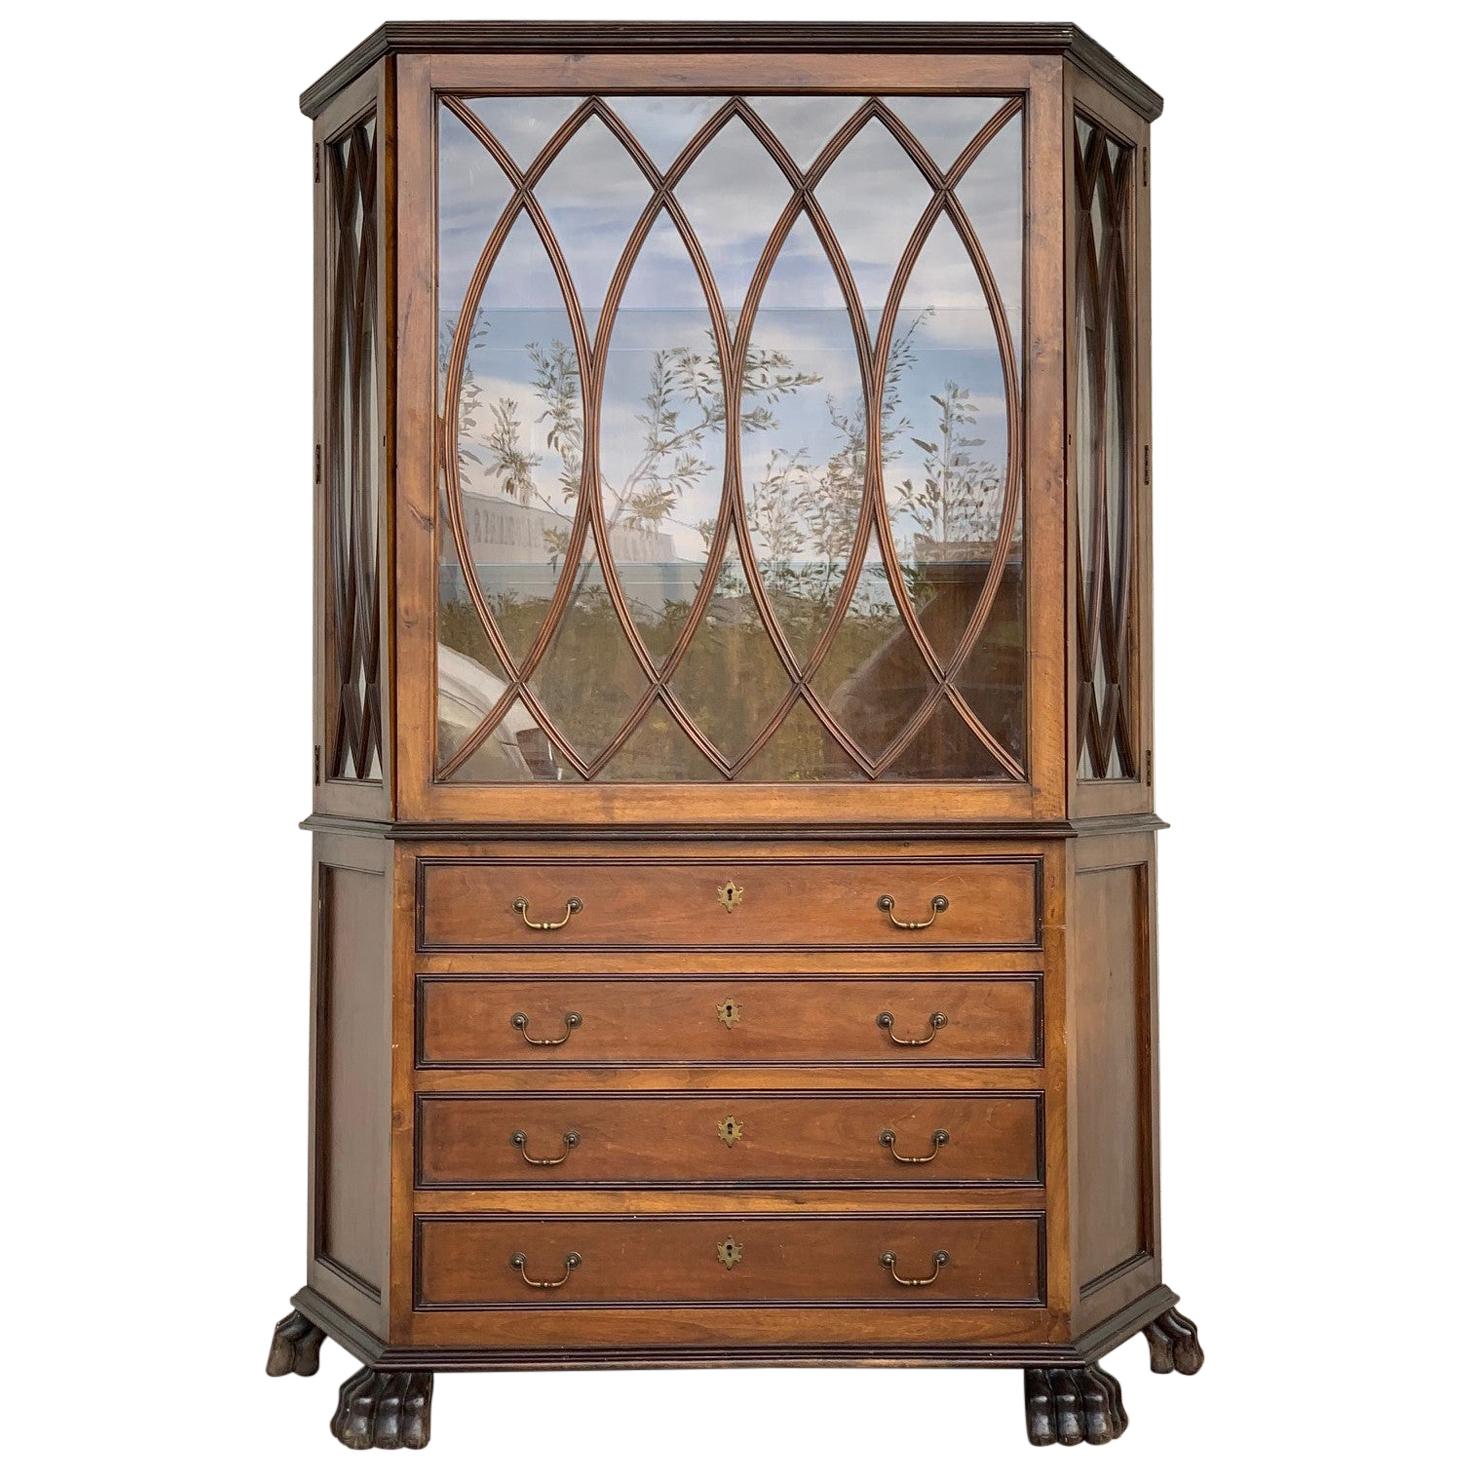 French Art Nouveau Fruitwood Wooden Showcase Vitrine with Four Drawers For Sale